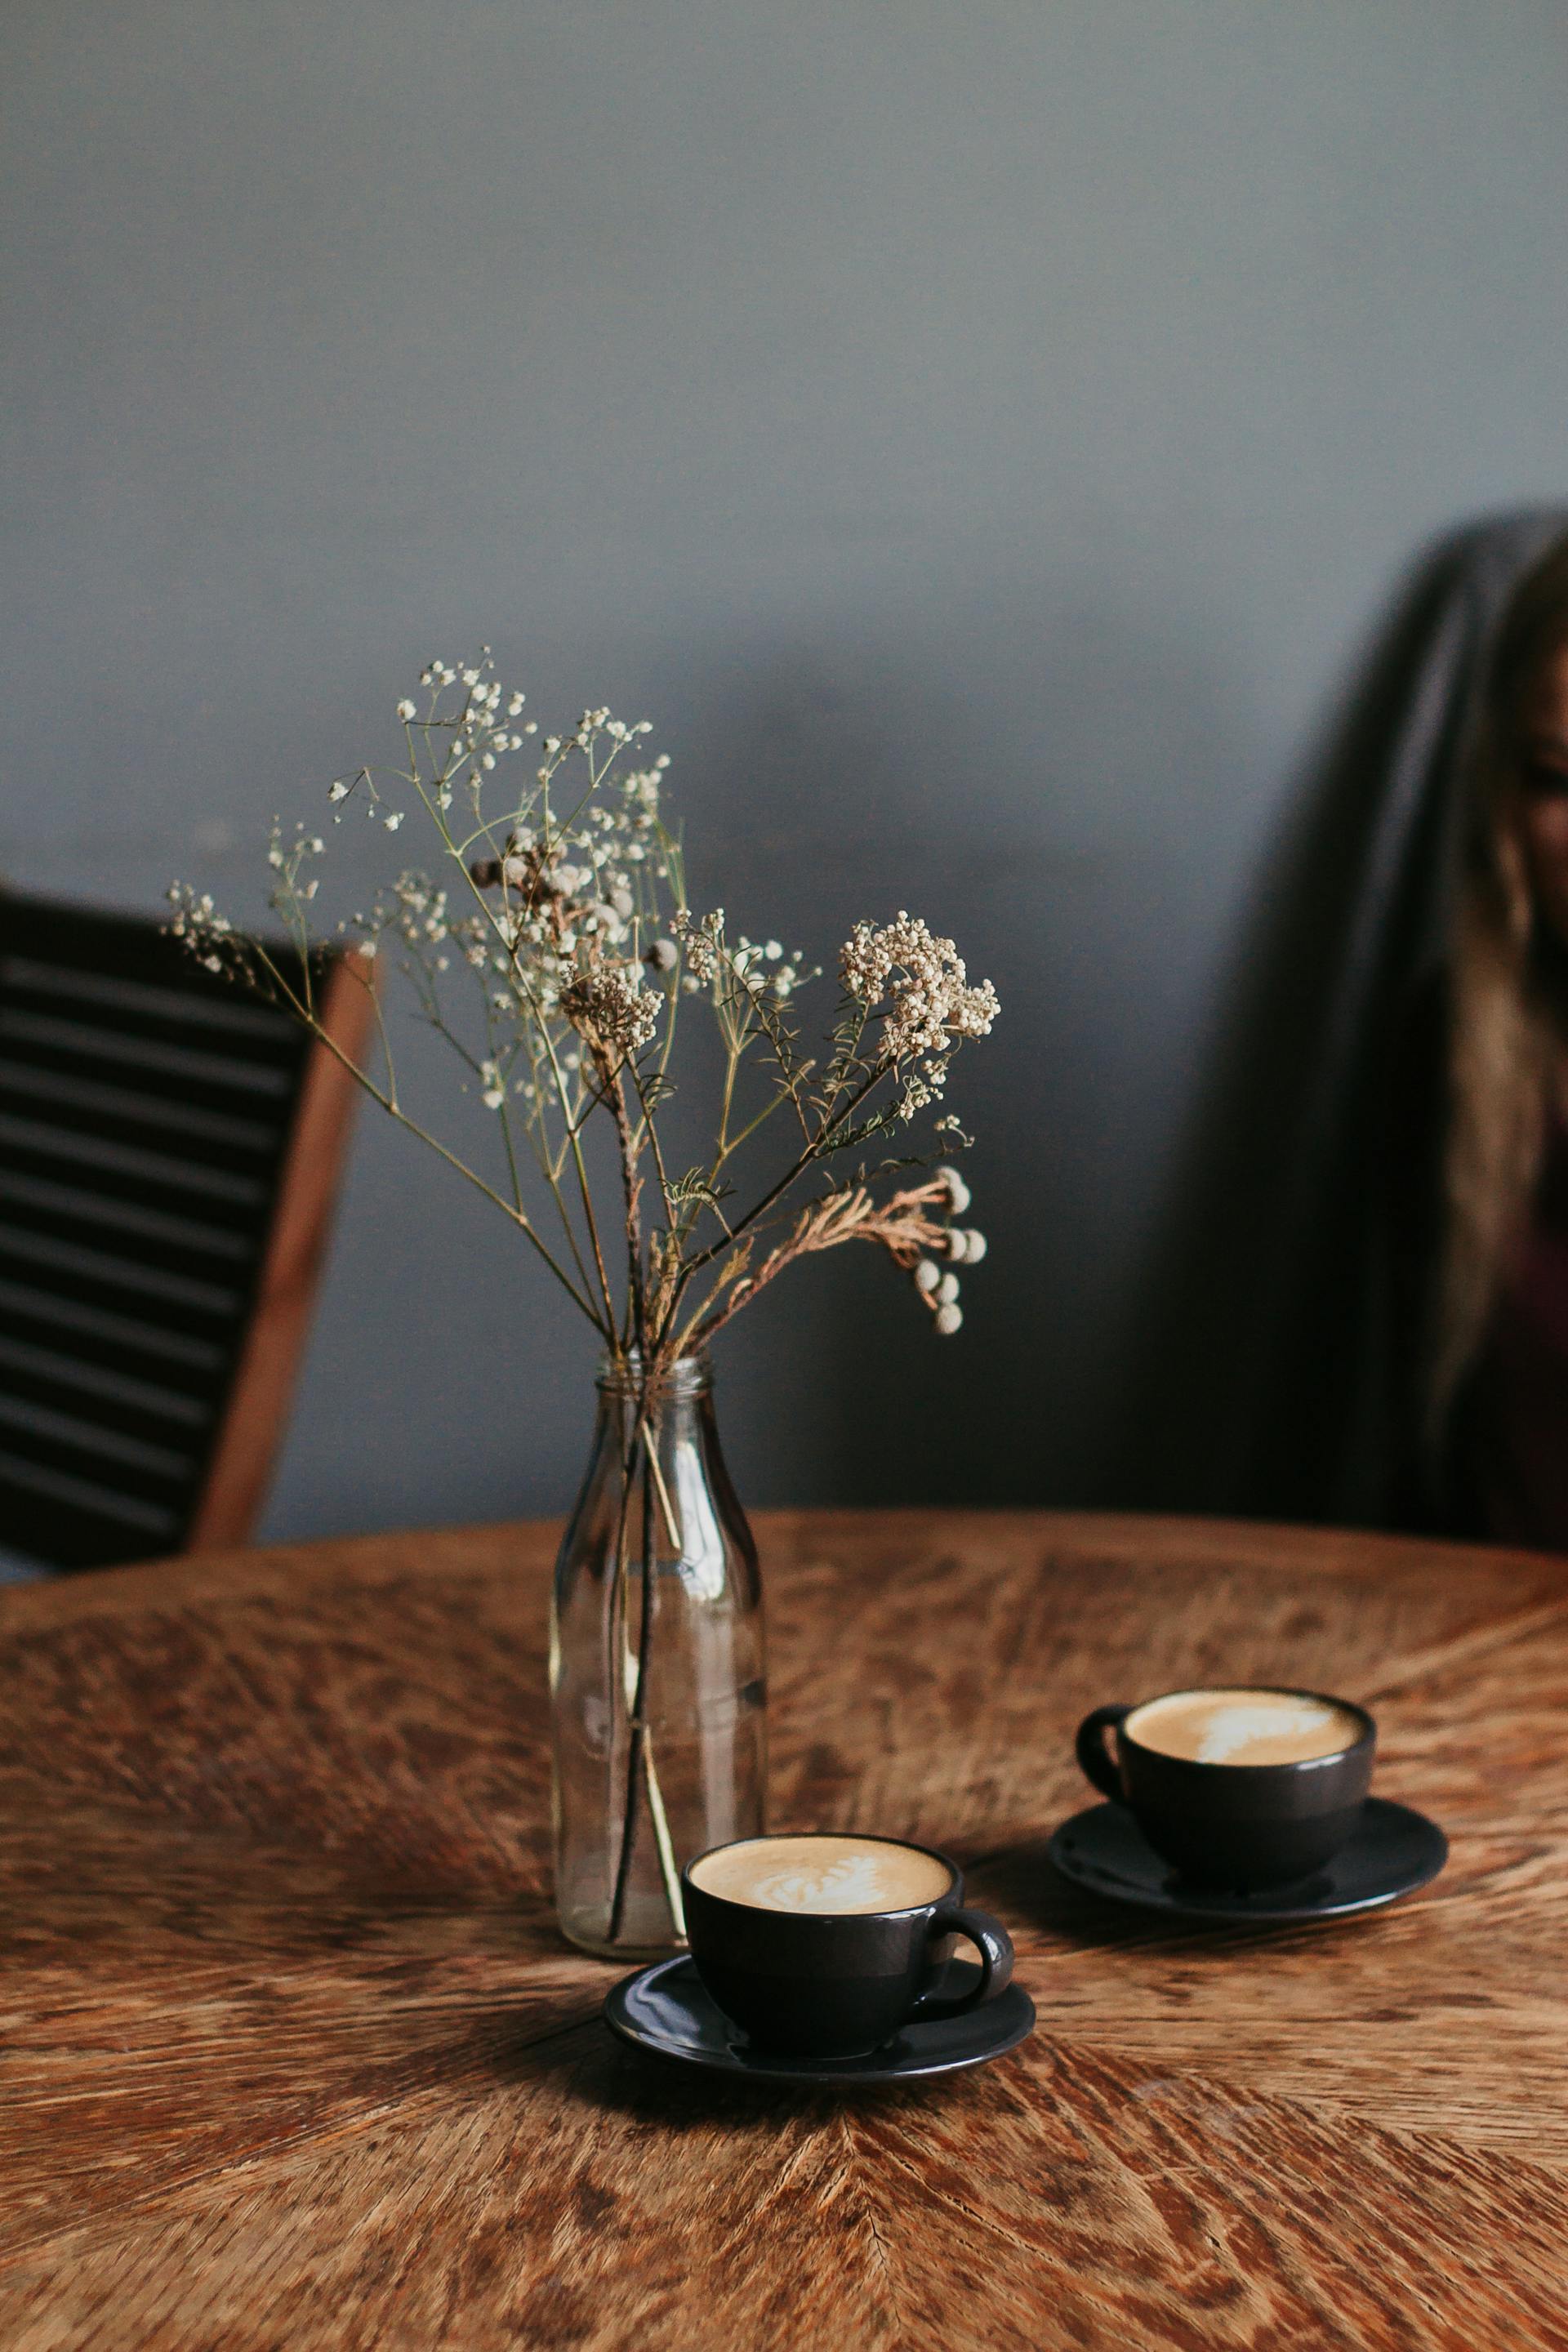 Two cups of coffee near a flower vase on a table | Source: Pexels